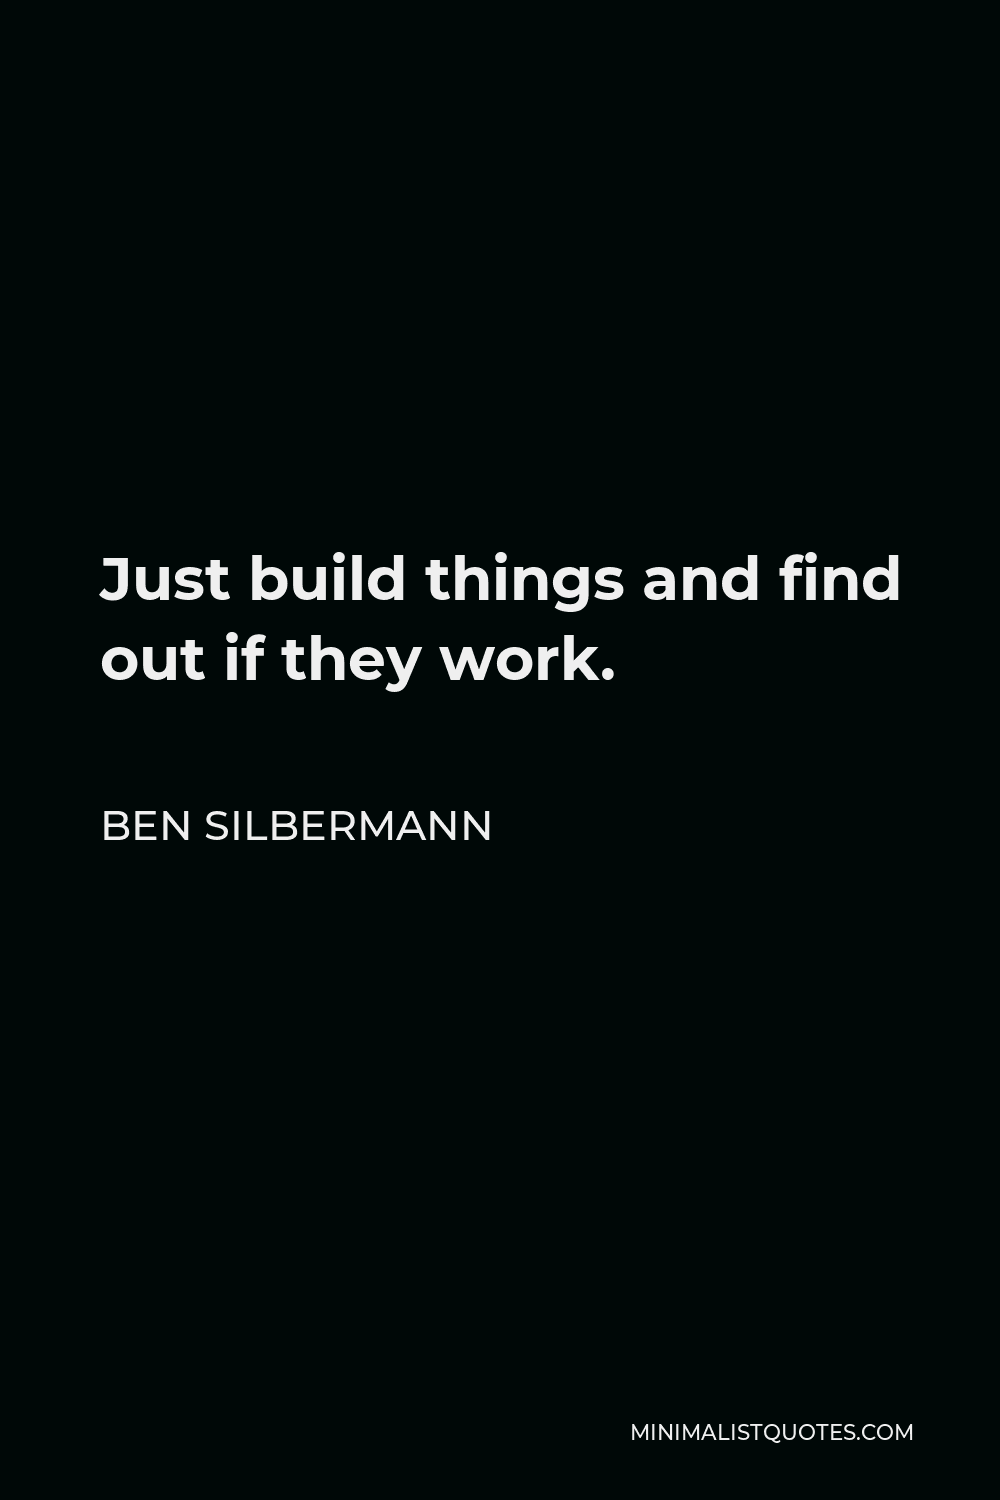 Ben Silbermann Quote - Just build things and find out if they work.